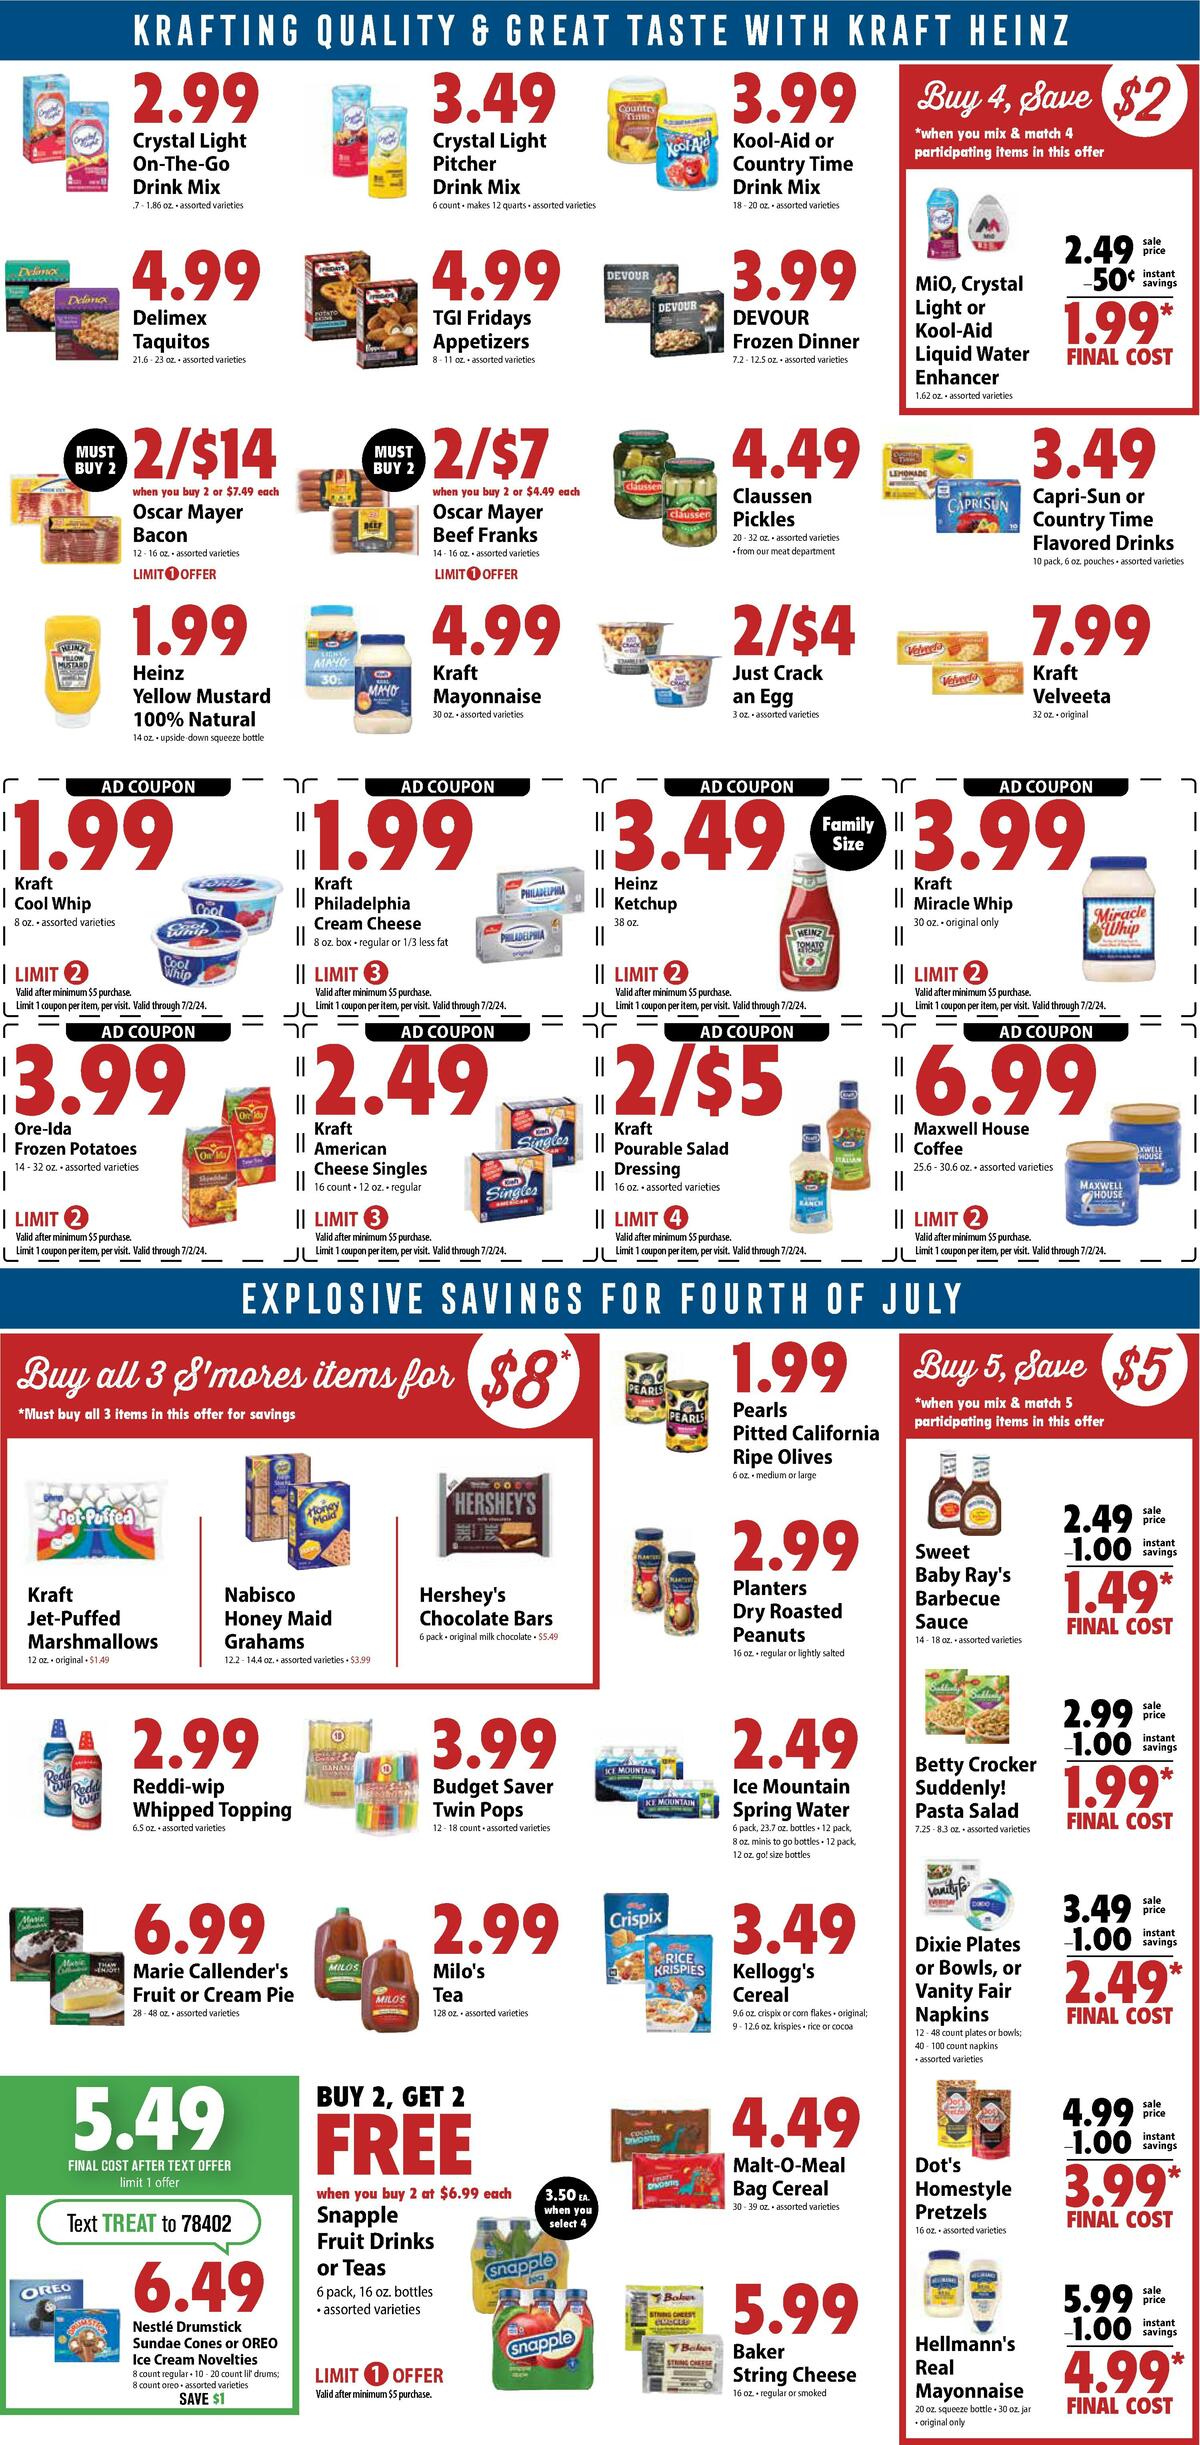 Festival Foods Weekly Ad from June 26